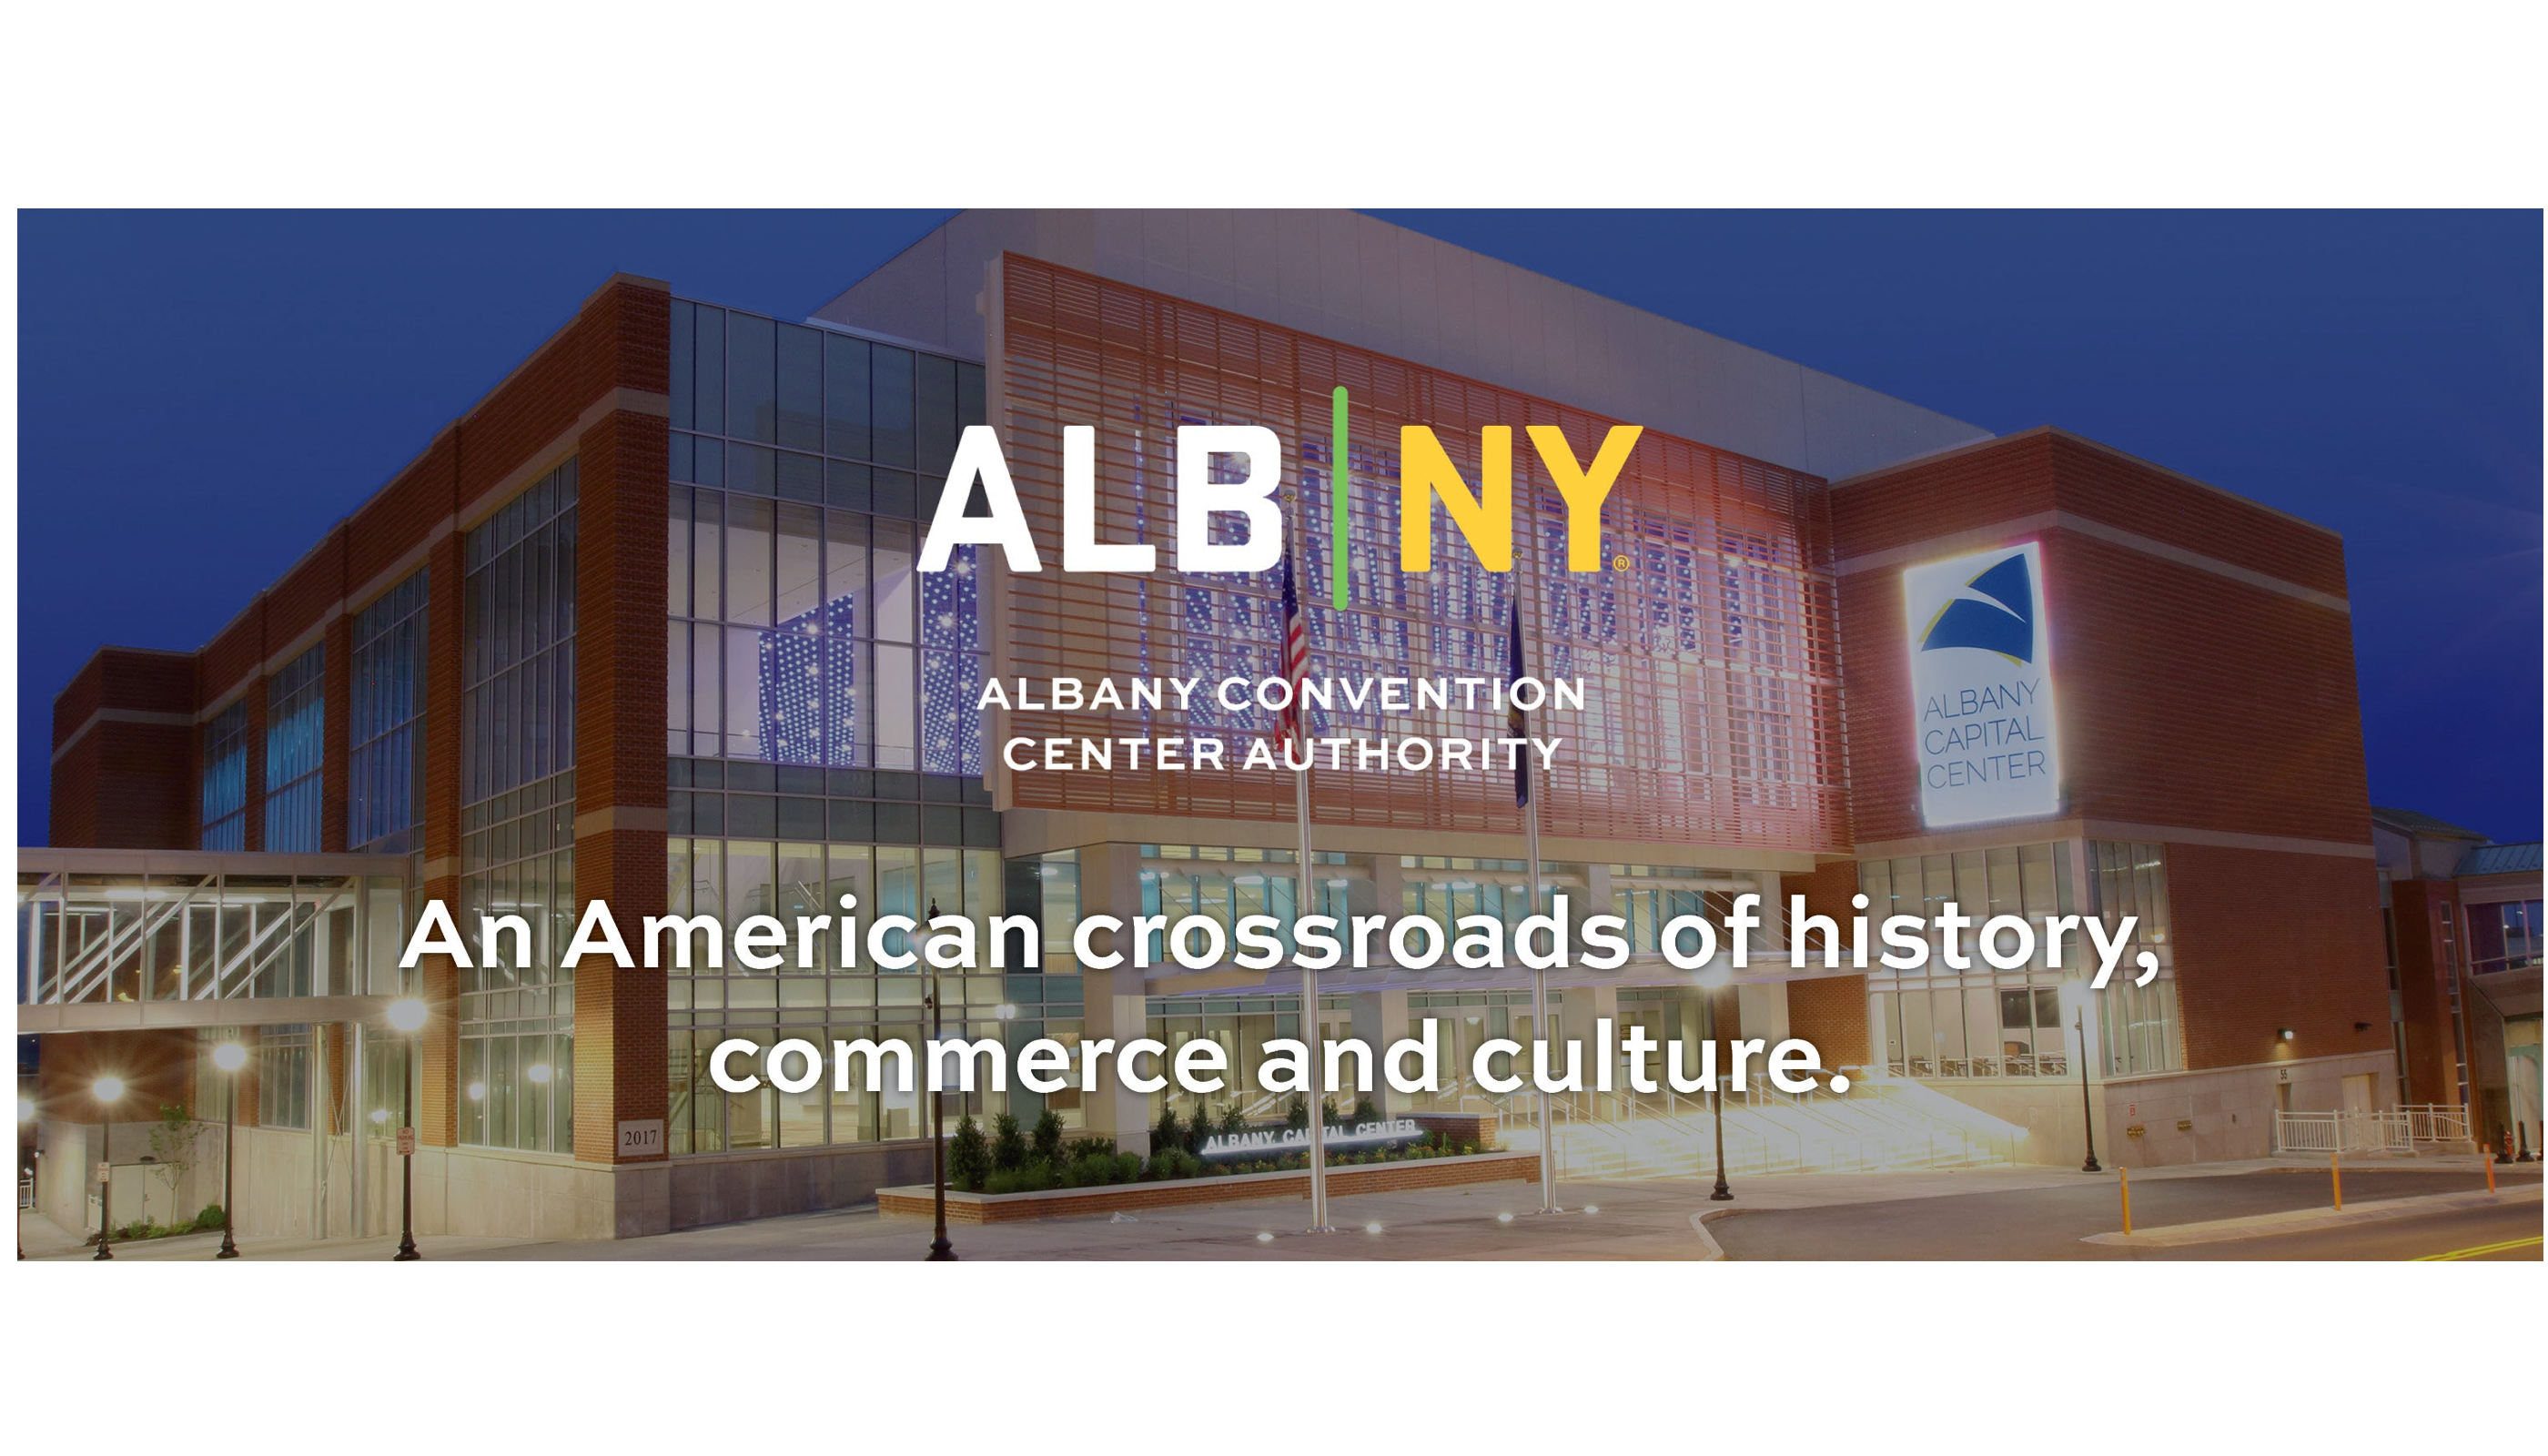 Albany Convention Center Authority